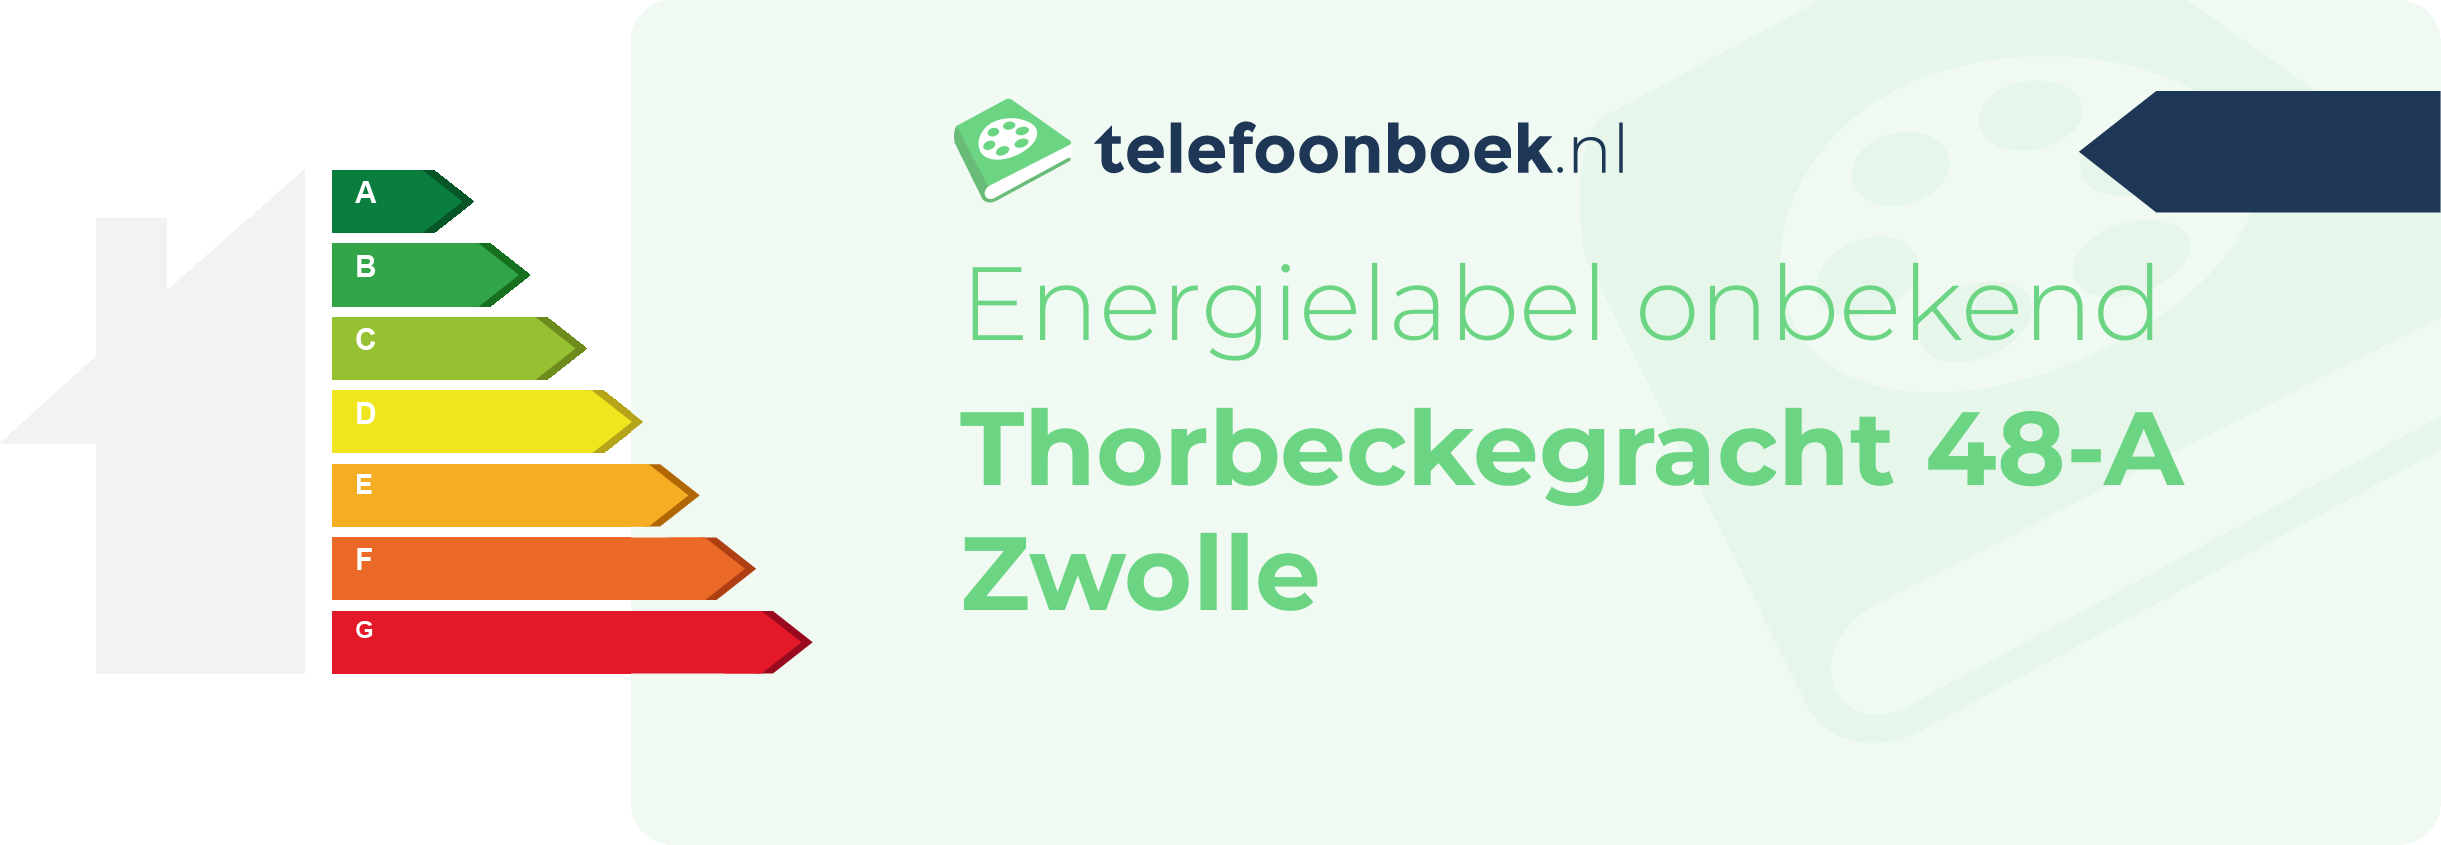 Energielabel Thorbeckegracht 48-A Zwolle